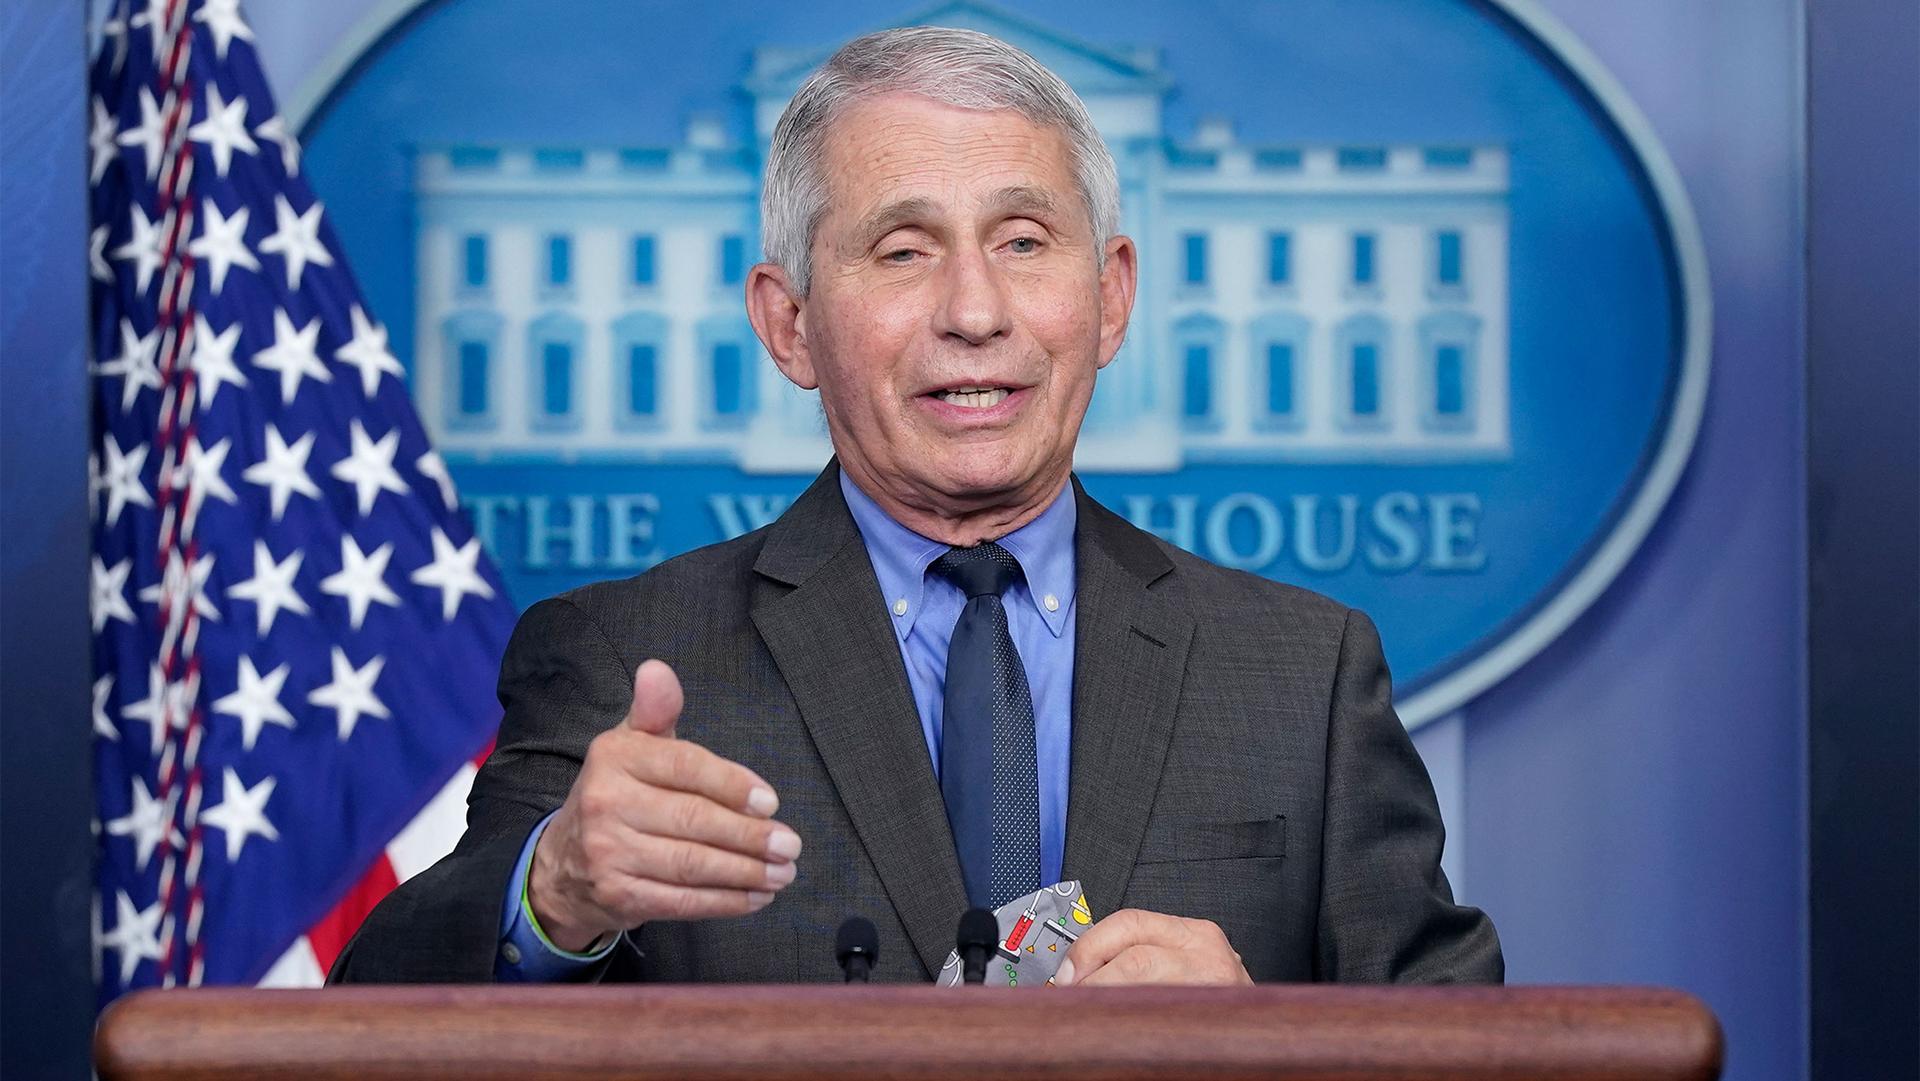 Dr. Fauci stands at a podium in the White House press room with the American flag over his shoulder